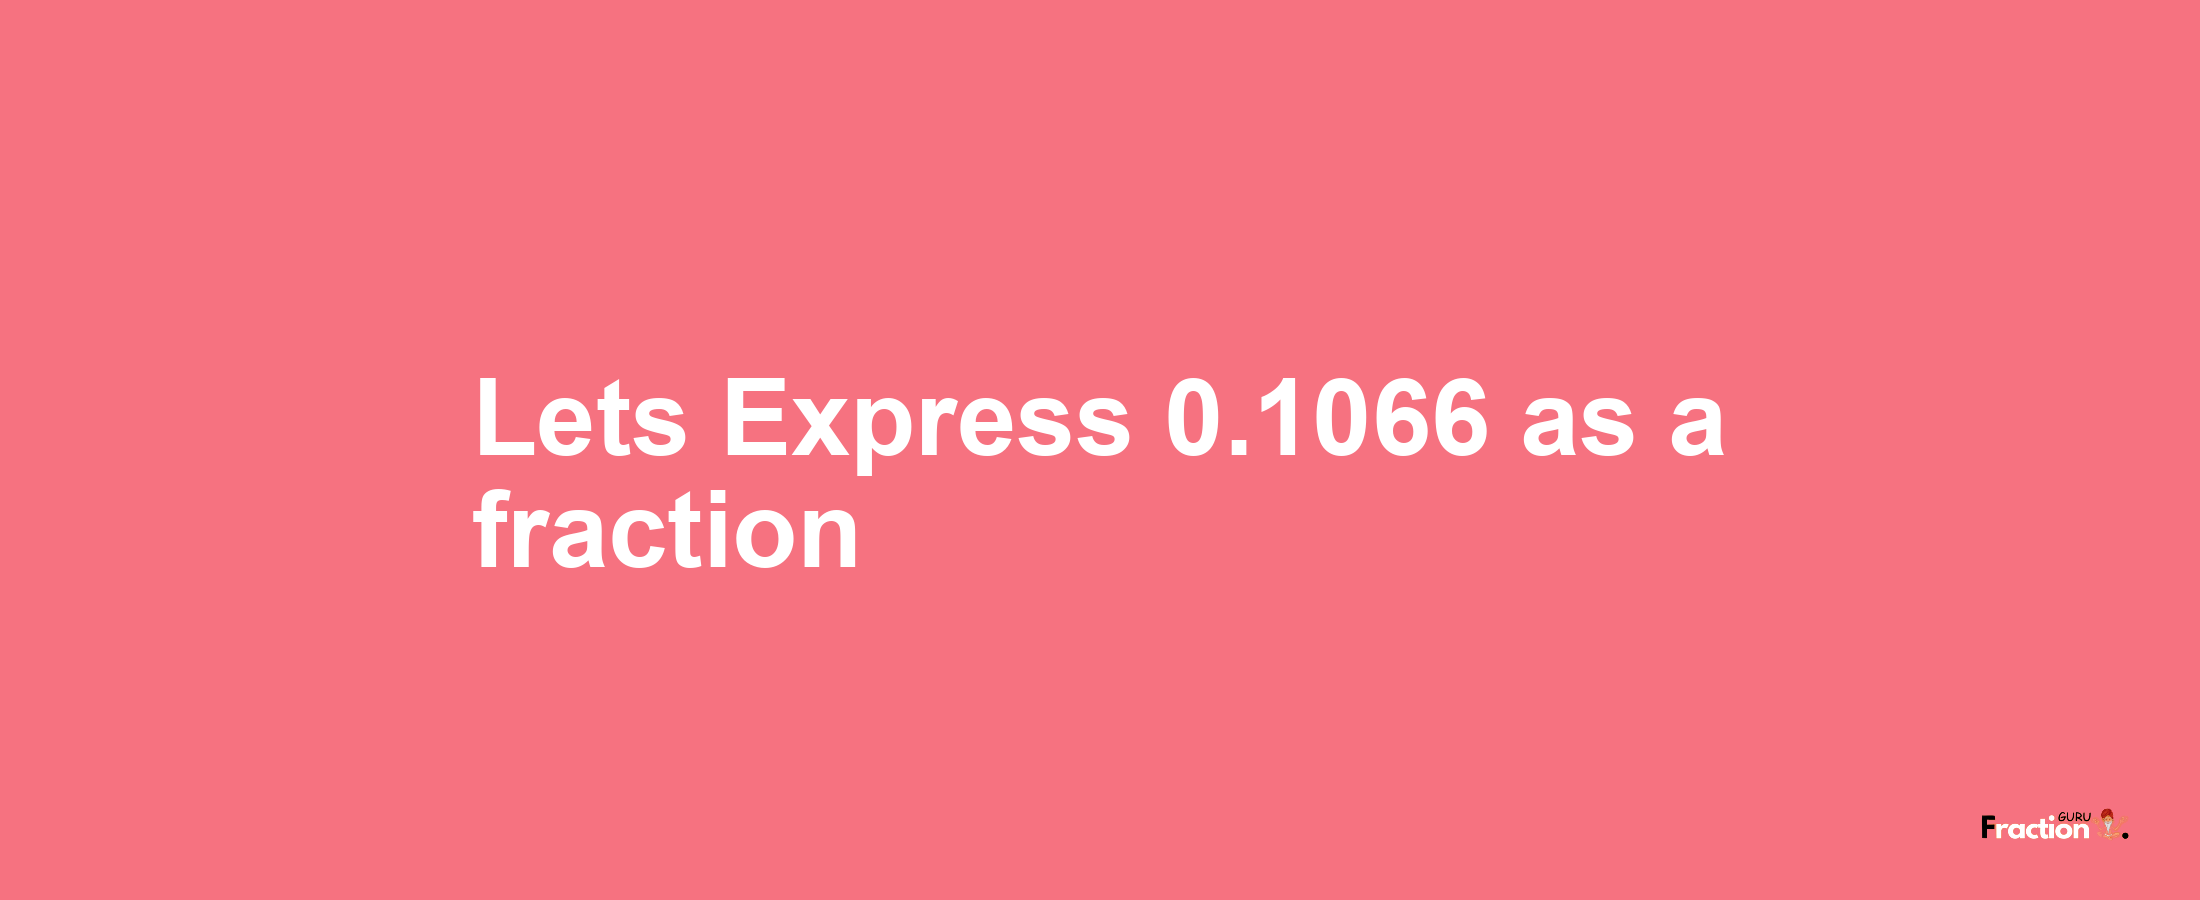 Lets Express 0.1066 as afraction